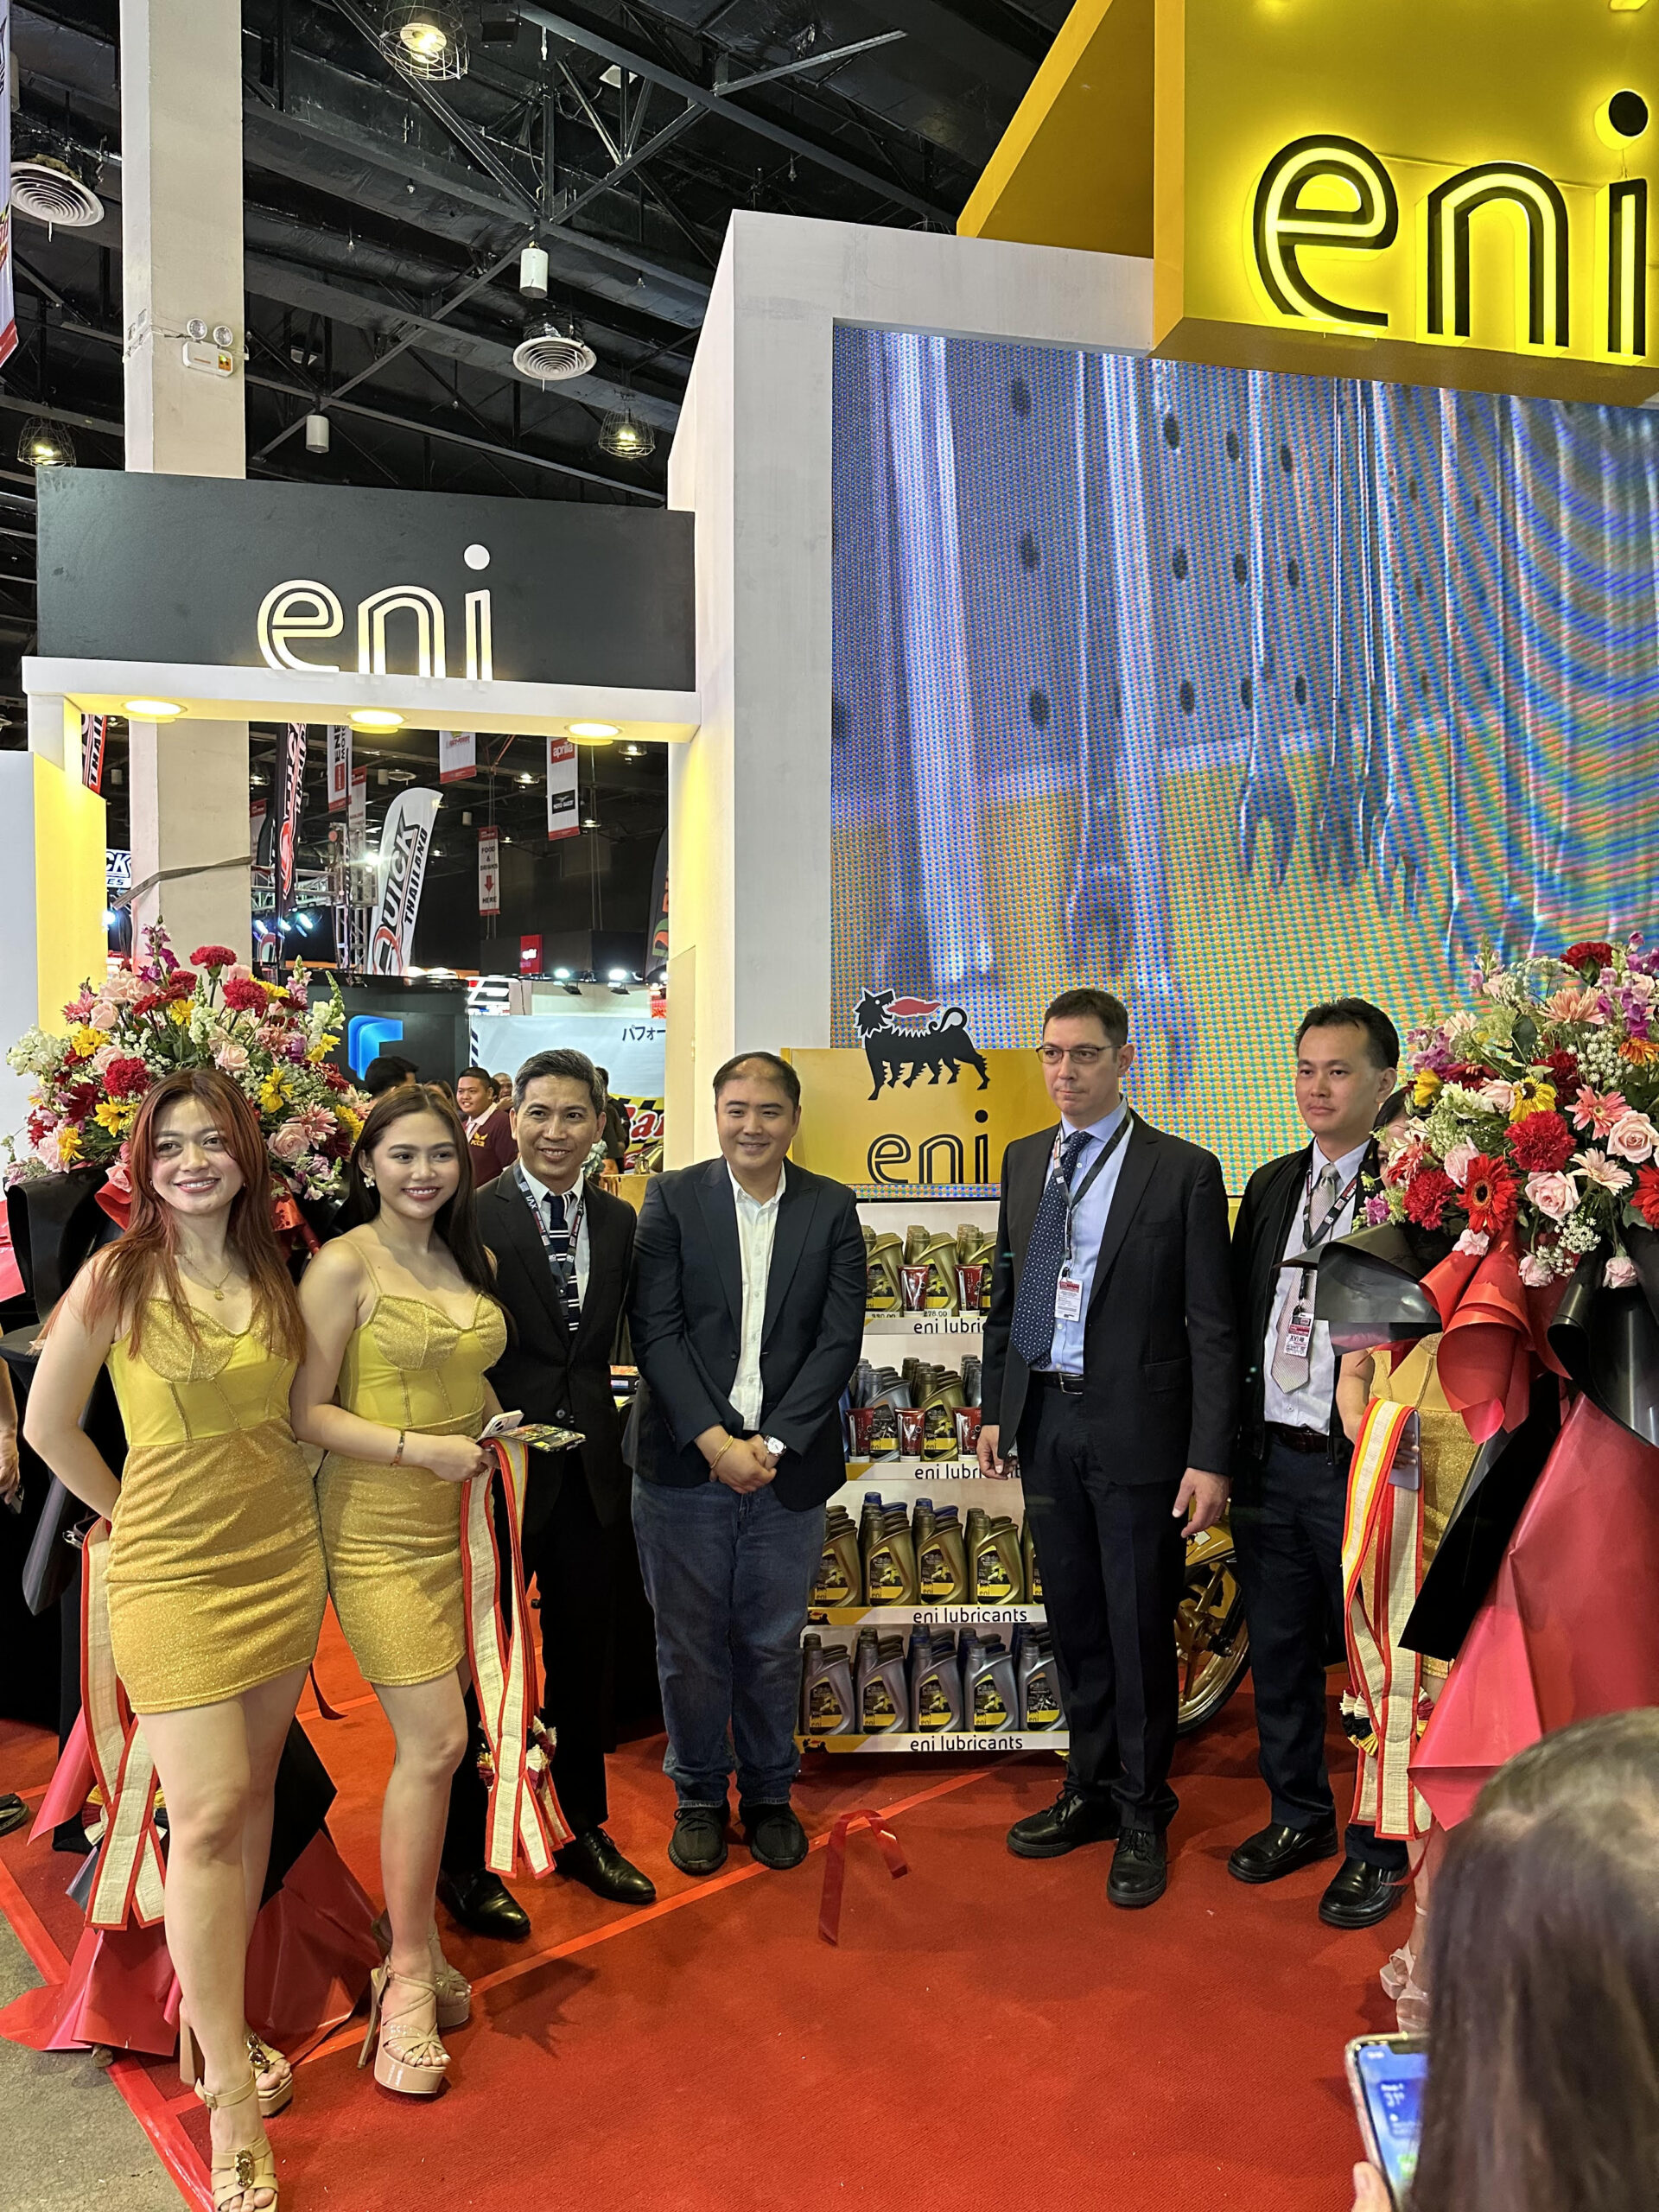 Global Automotive Leader ENI Launches Innovative Lubricants in the Philippine Market  